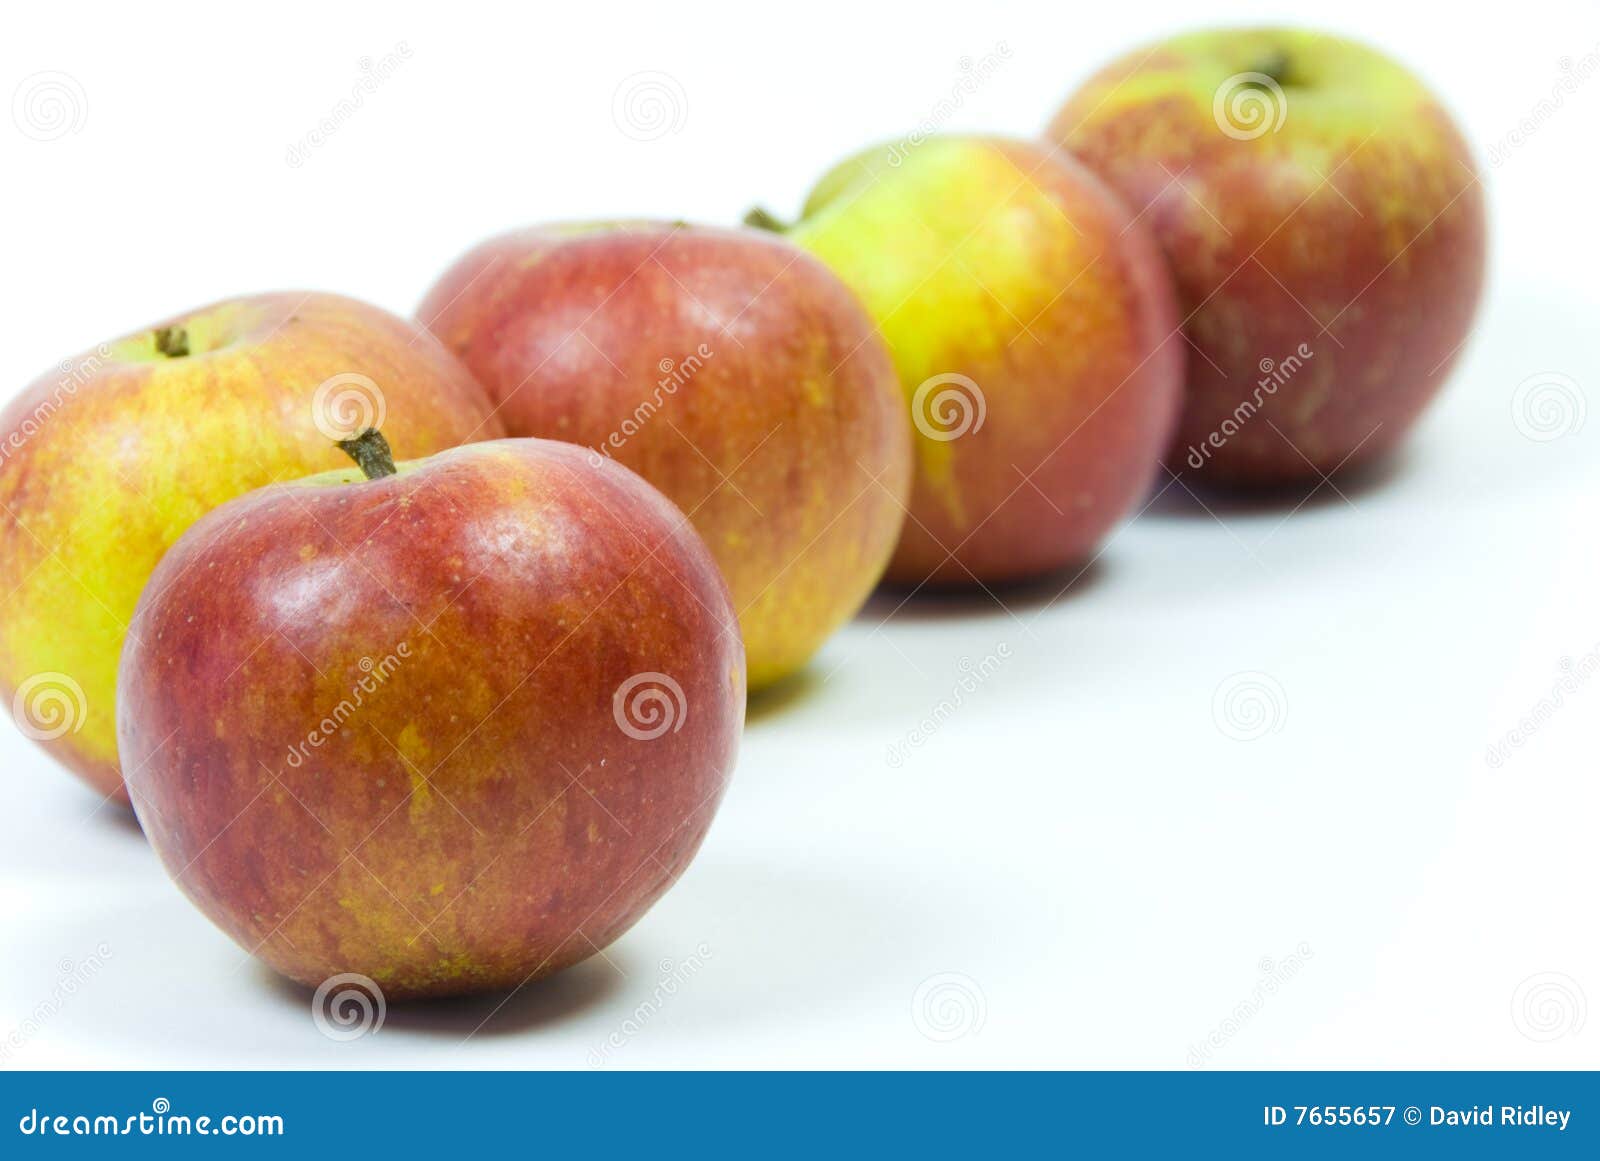 Five ripe english cox s pippin apples on white background